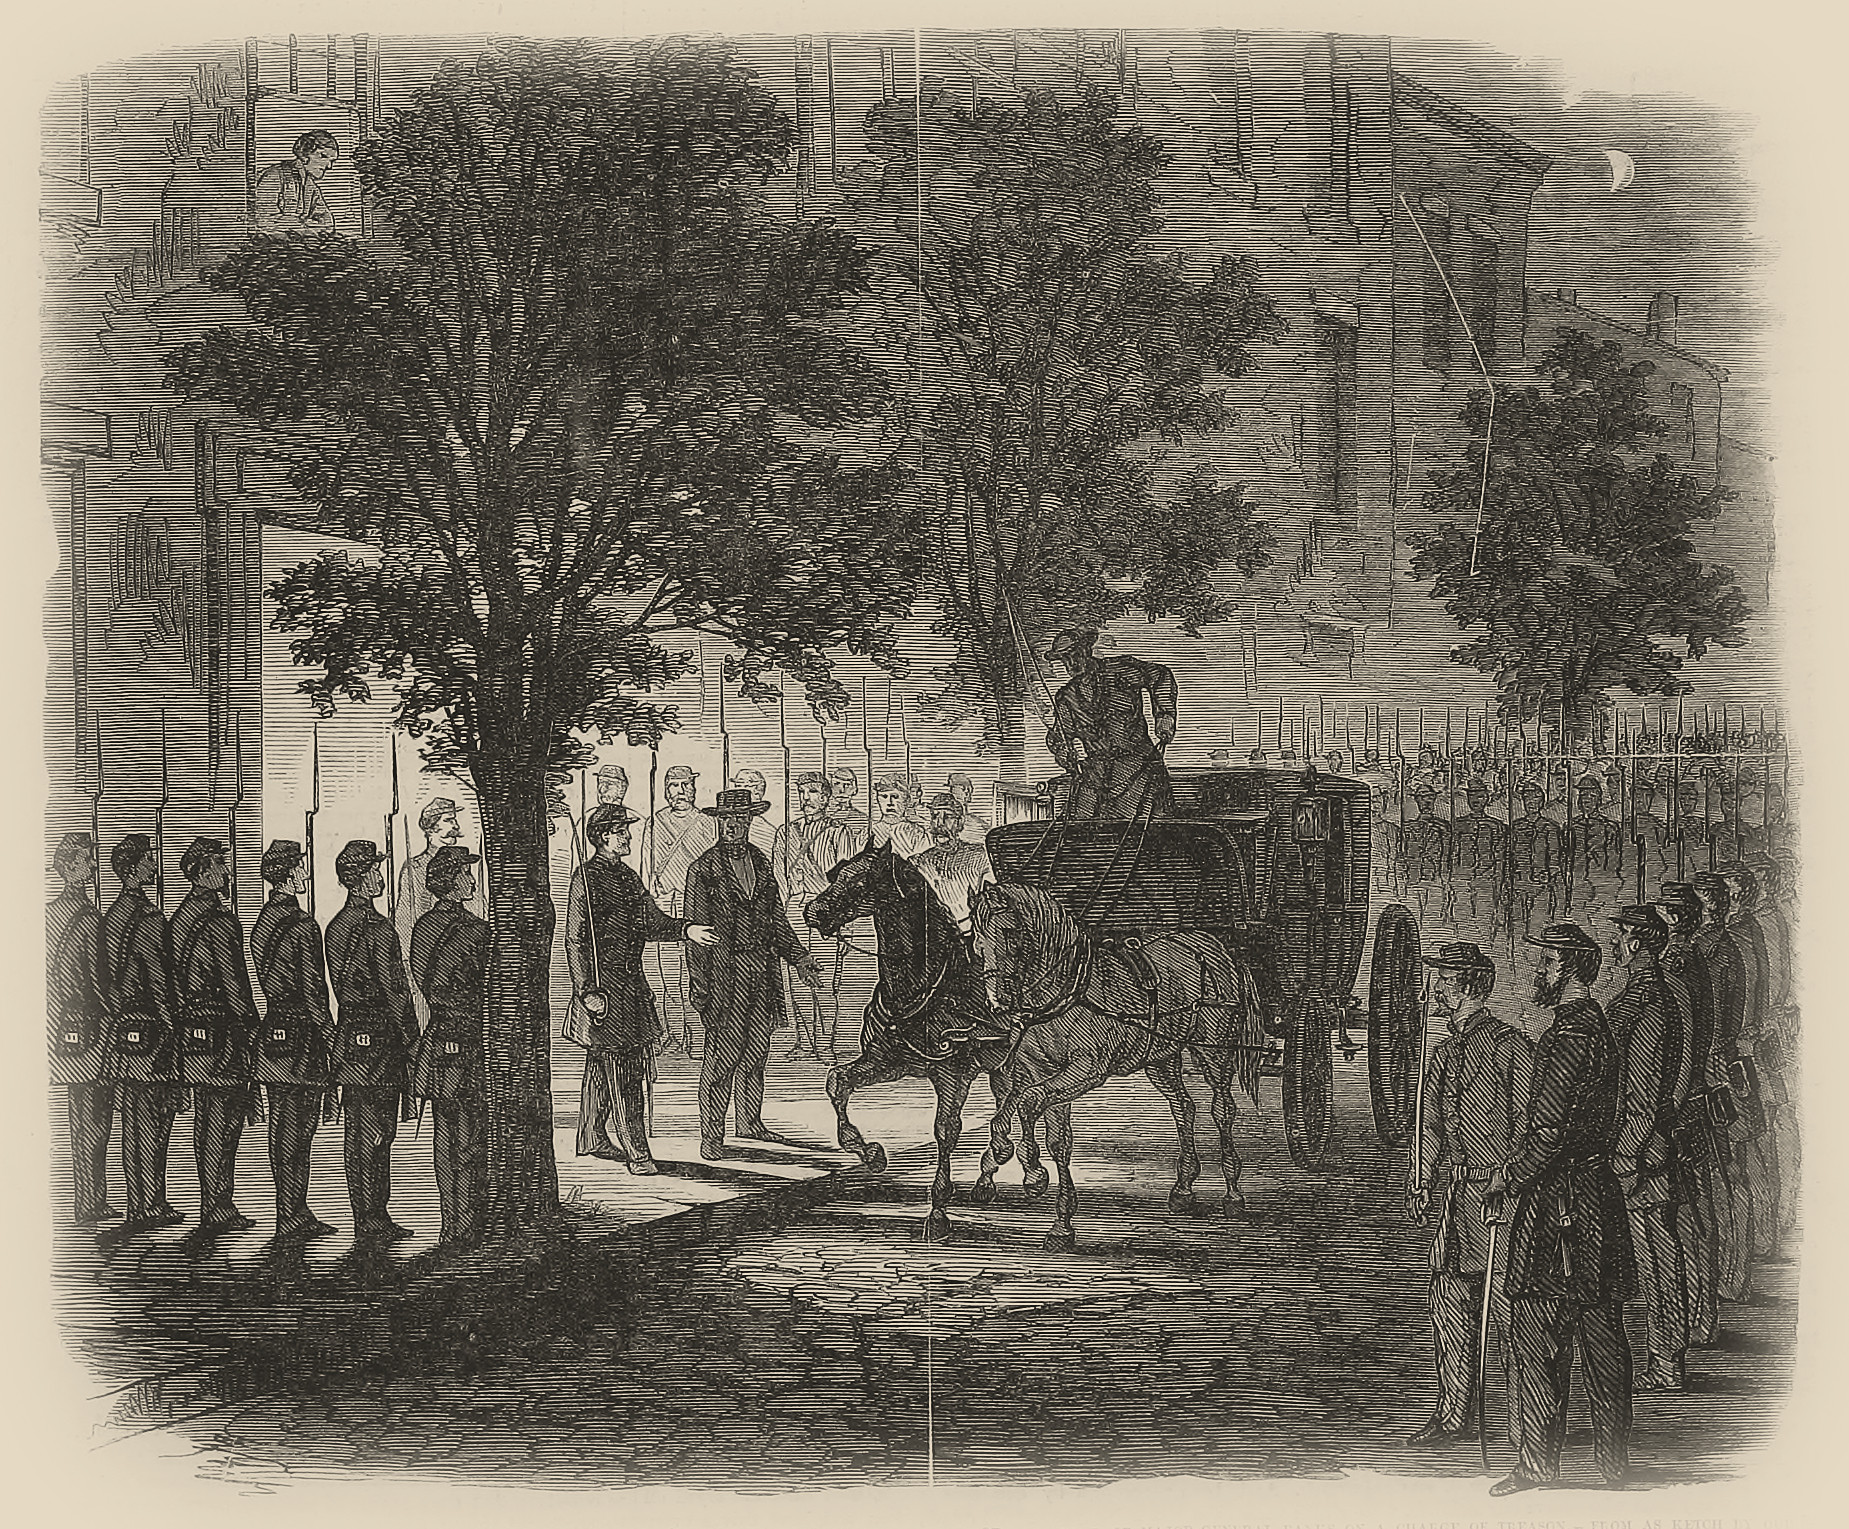 Arrest of Marshall Kane, at his House in Baltimore, at Three O'clock A. M., on Tuesday, June 27, by Order of Major-General Banks on a Charge of Treason